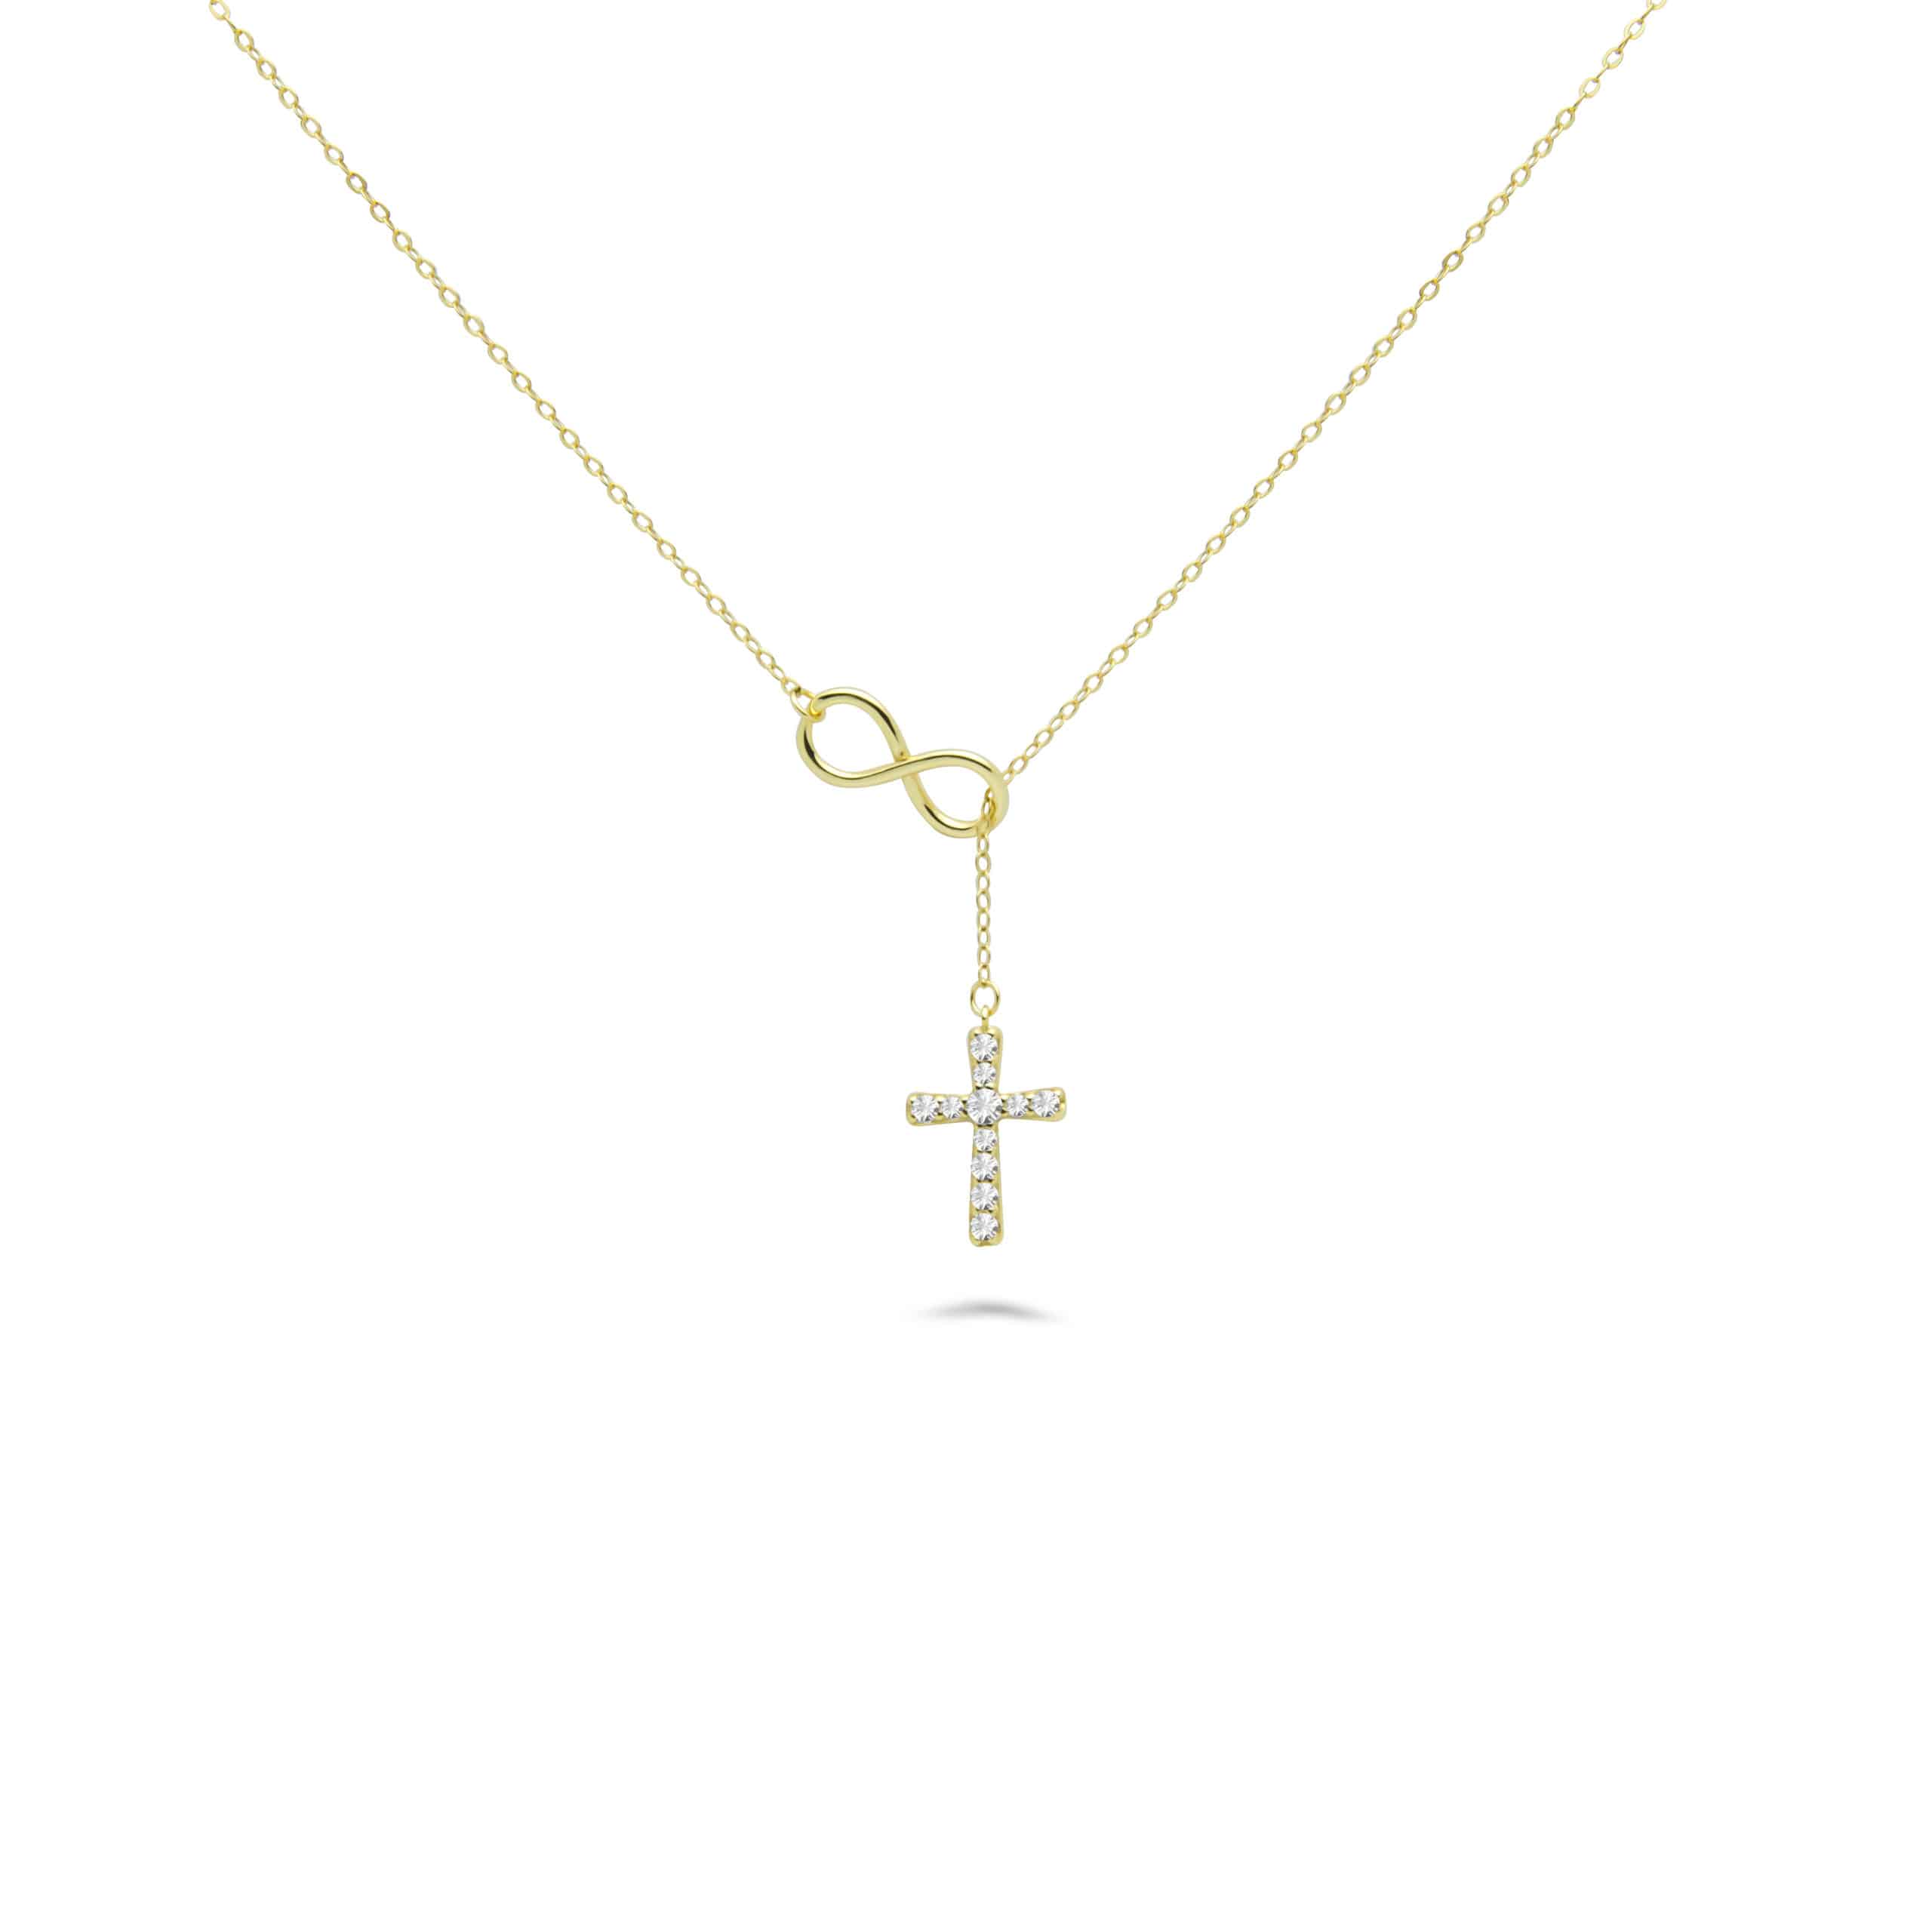 Amara Necklace (925 Sterling Silver with 18K Gold Plating) - Dear Me ...